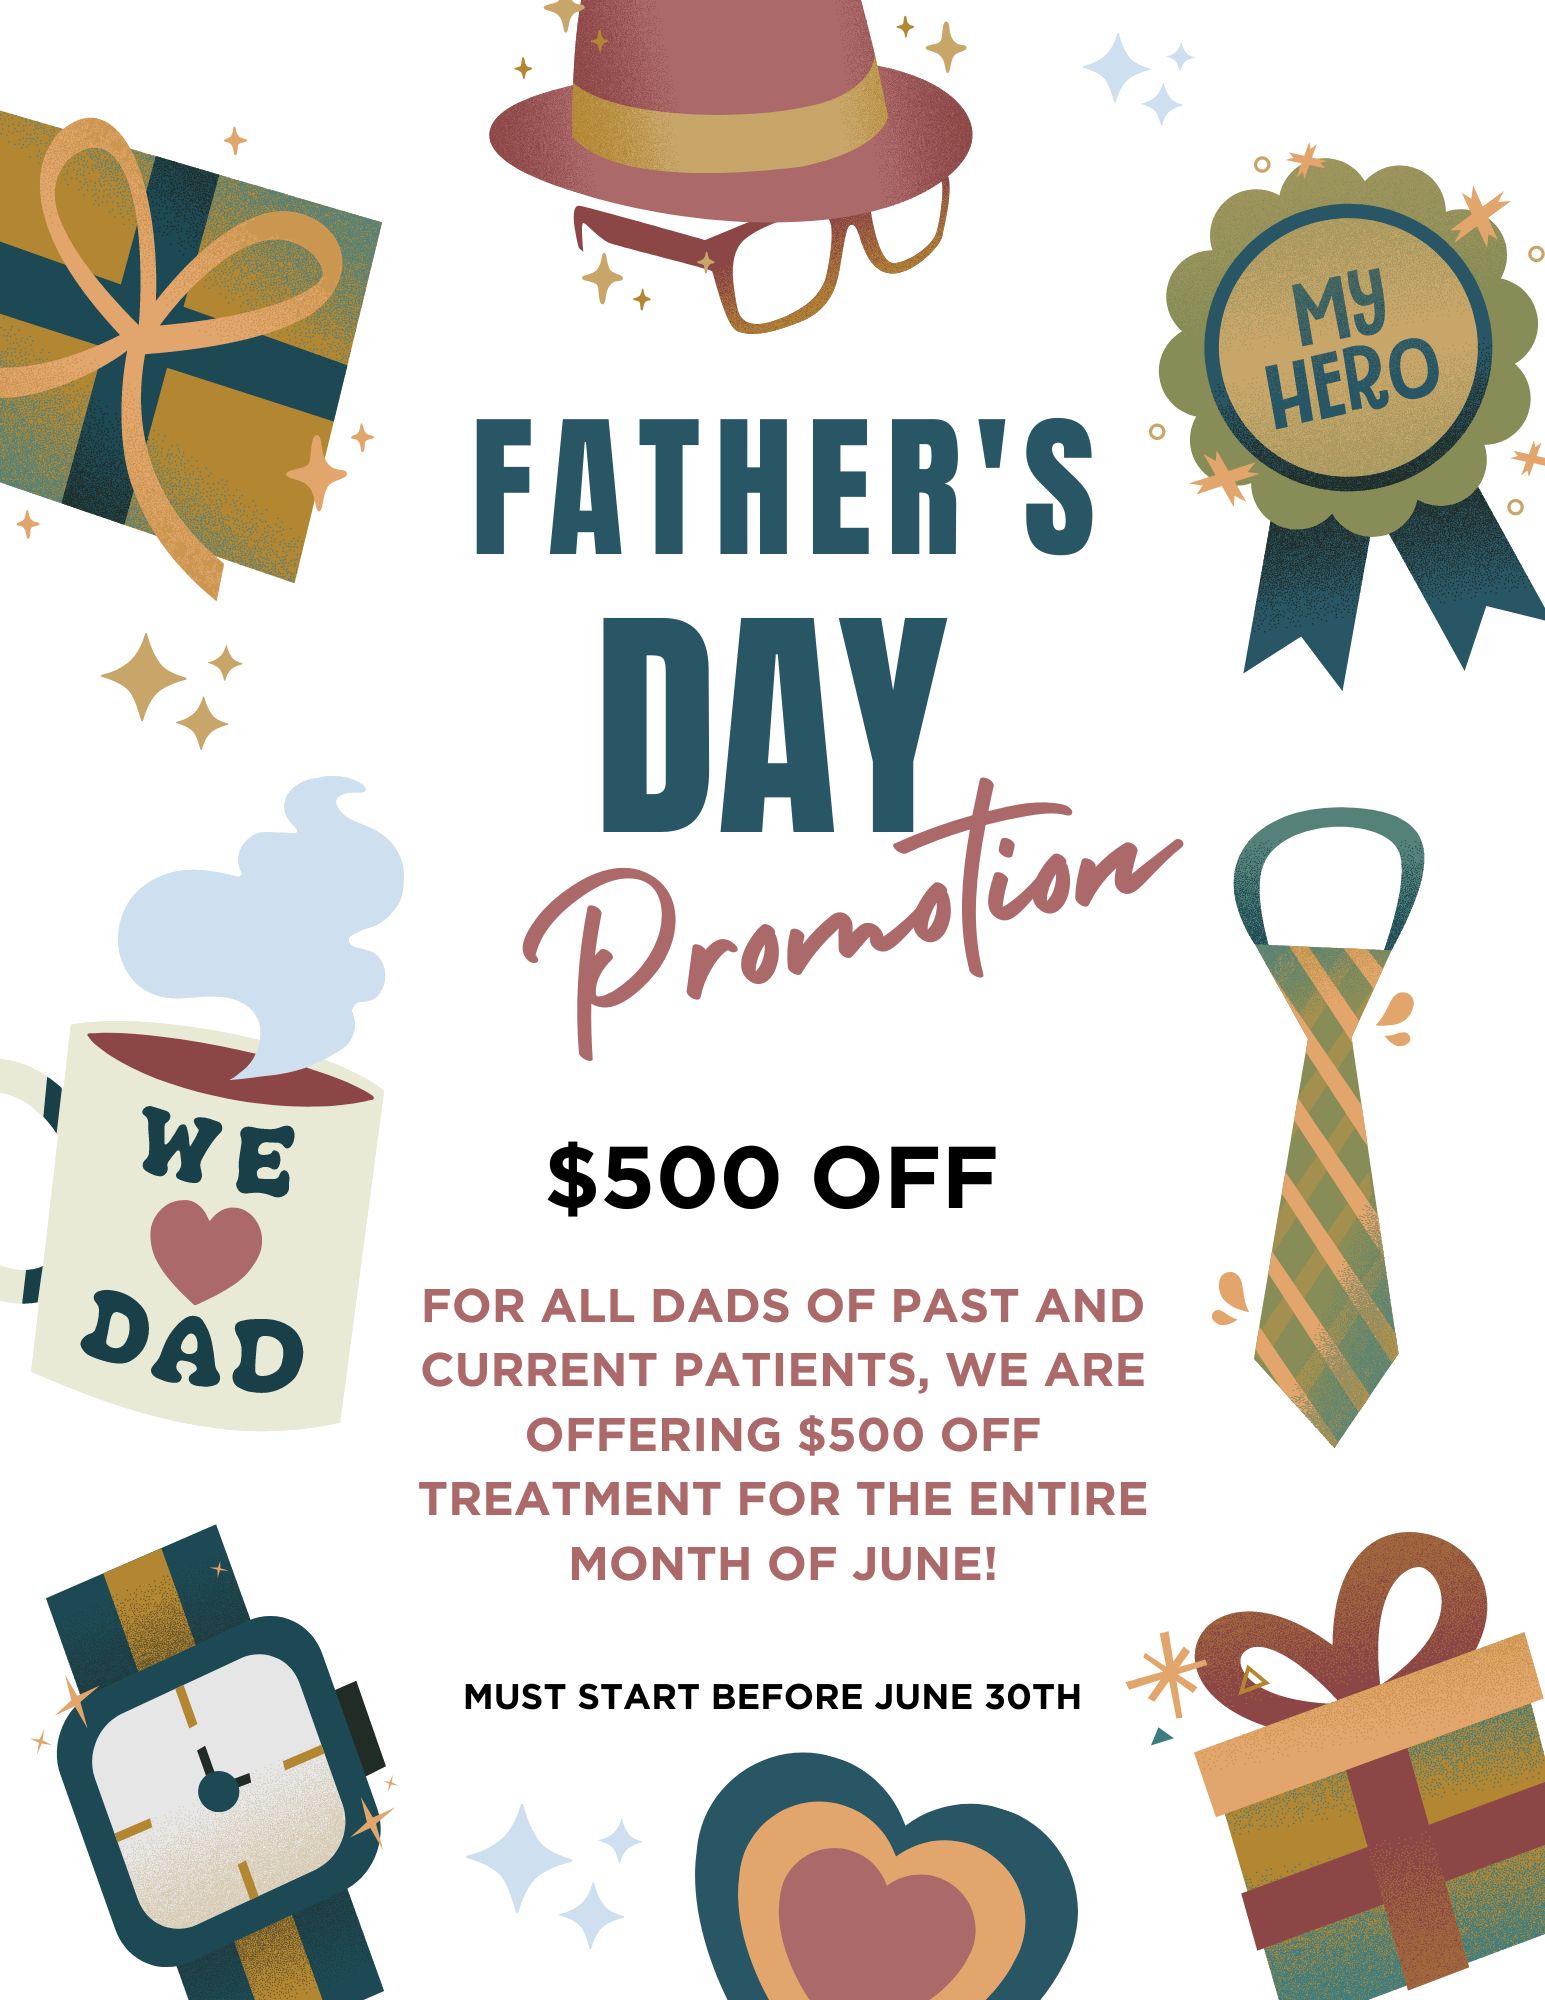 Promotional flyer for Father's Day